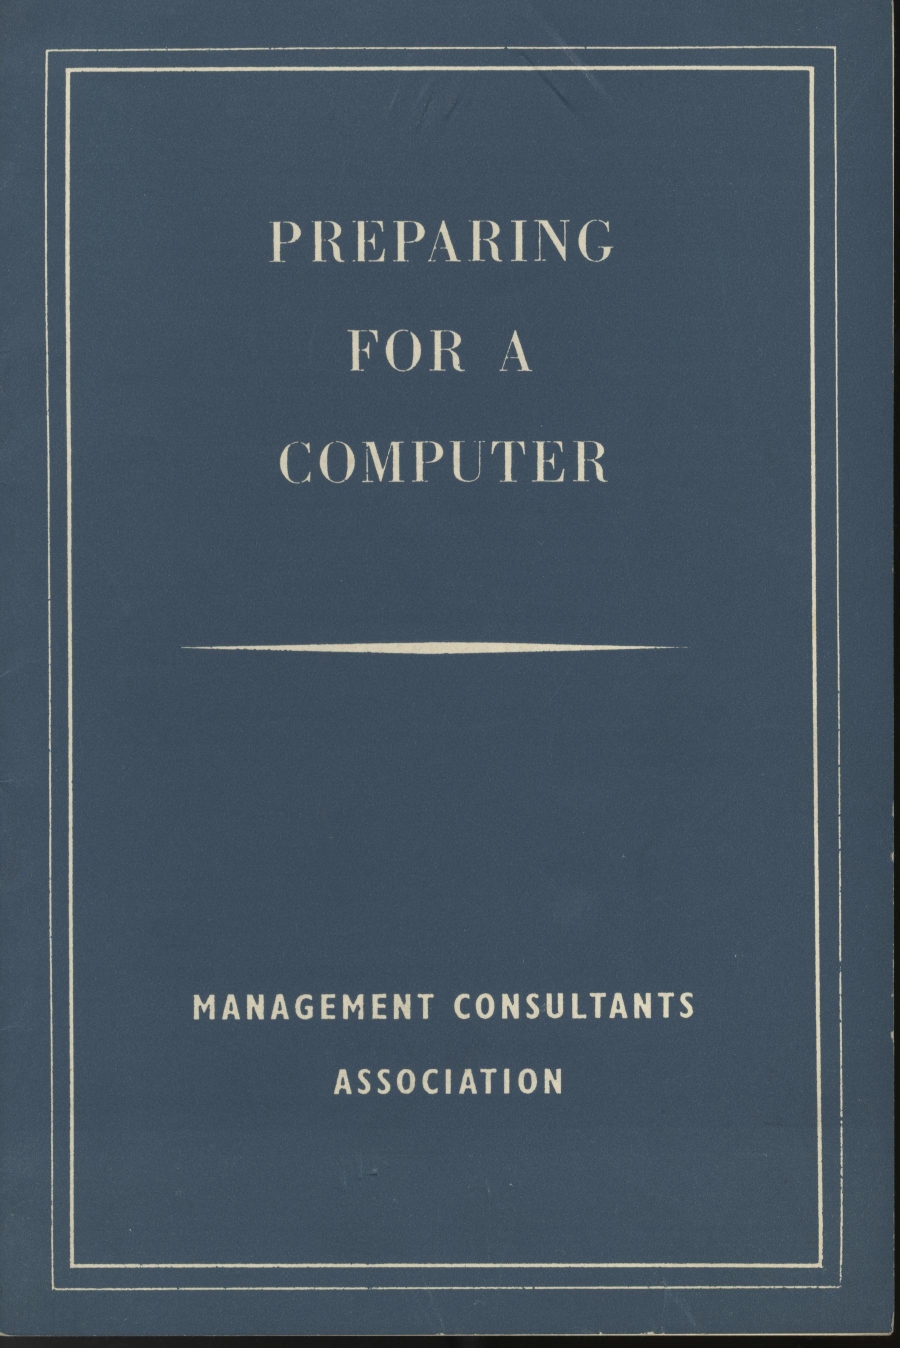 Article: 54626 Preparing for a Computer